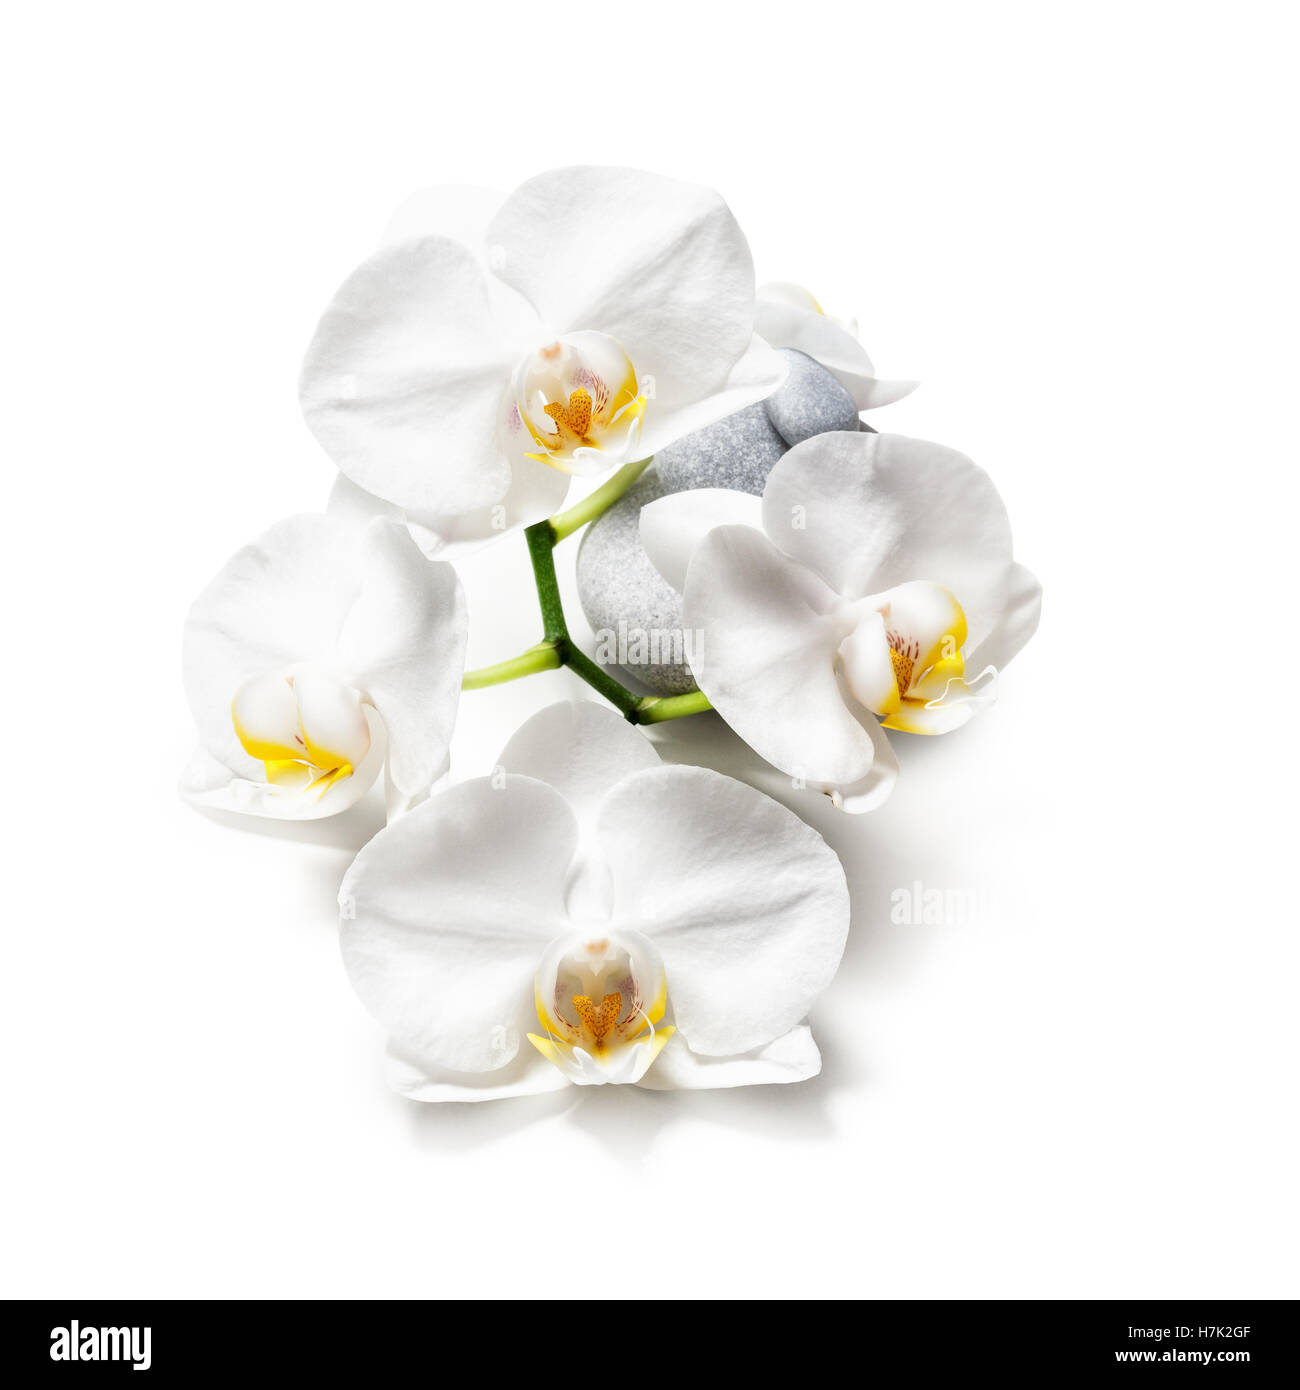 White orchid flowers and spa stones isolated on white background clipping path included Stock Photo